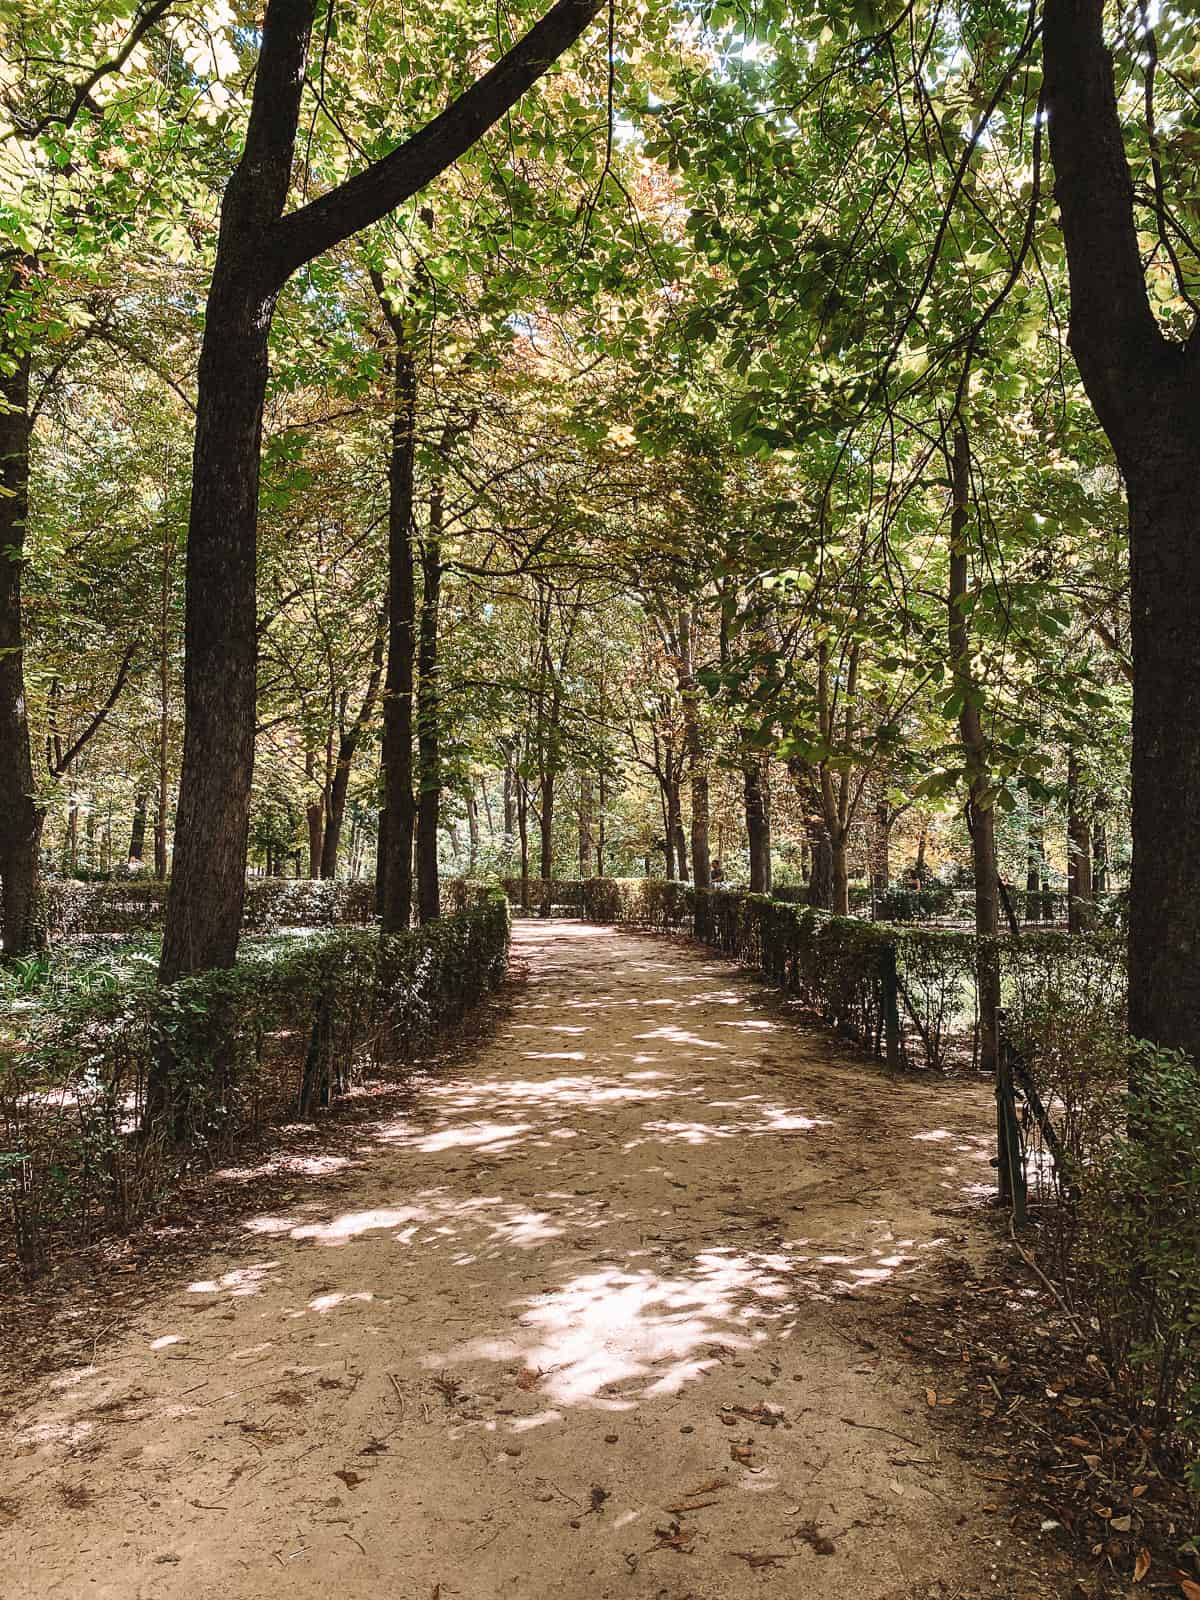 A tranquil pathway at Retiro Park, Madrid, Spain, surrounded by trees with leaves turning autumnal, highlighting the park's natural beauty in the heart of the city.